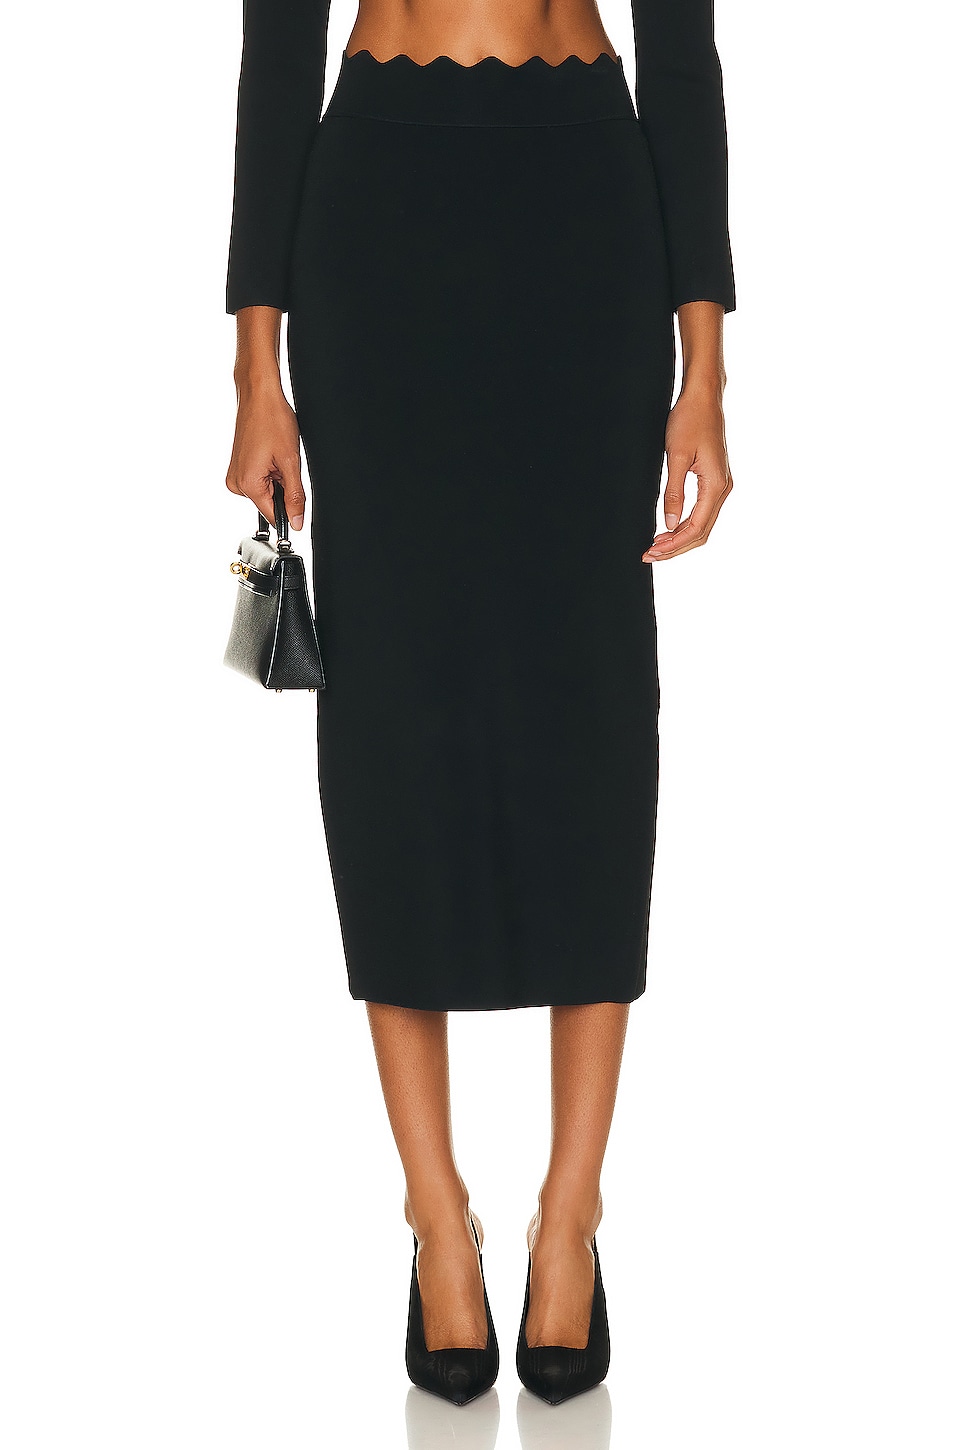 Image 1 of A.L.C. Quincy Skirt in Black